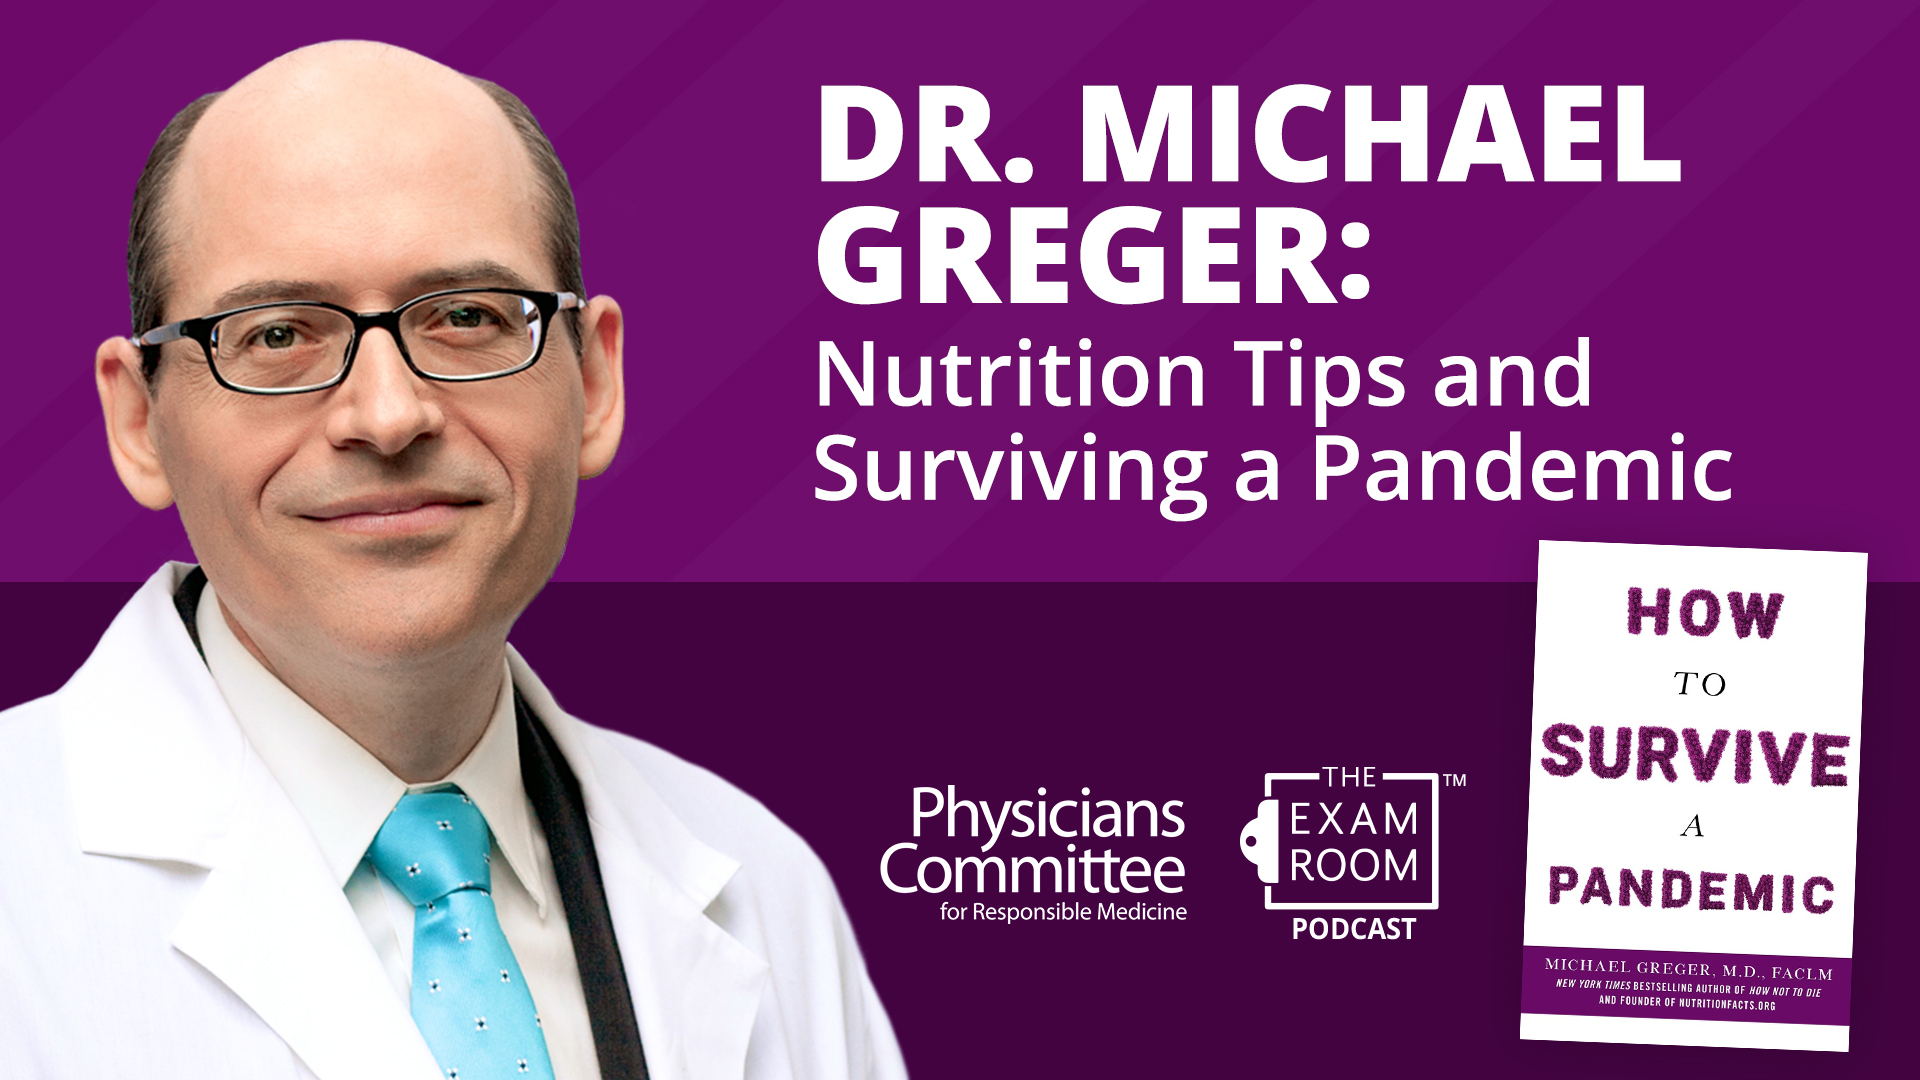 Dr. Michael Greger: Nutrition Tips and Surviving a Pandemic